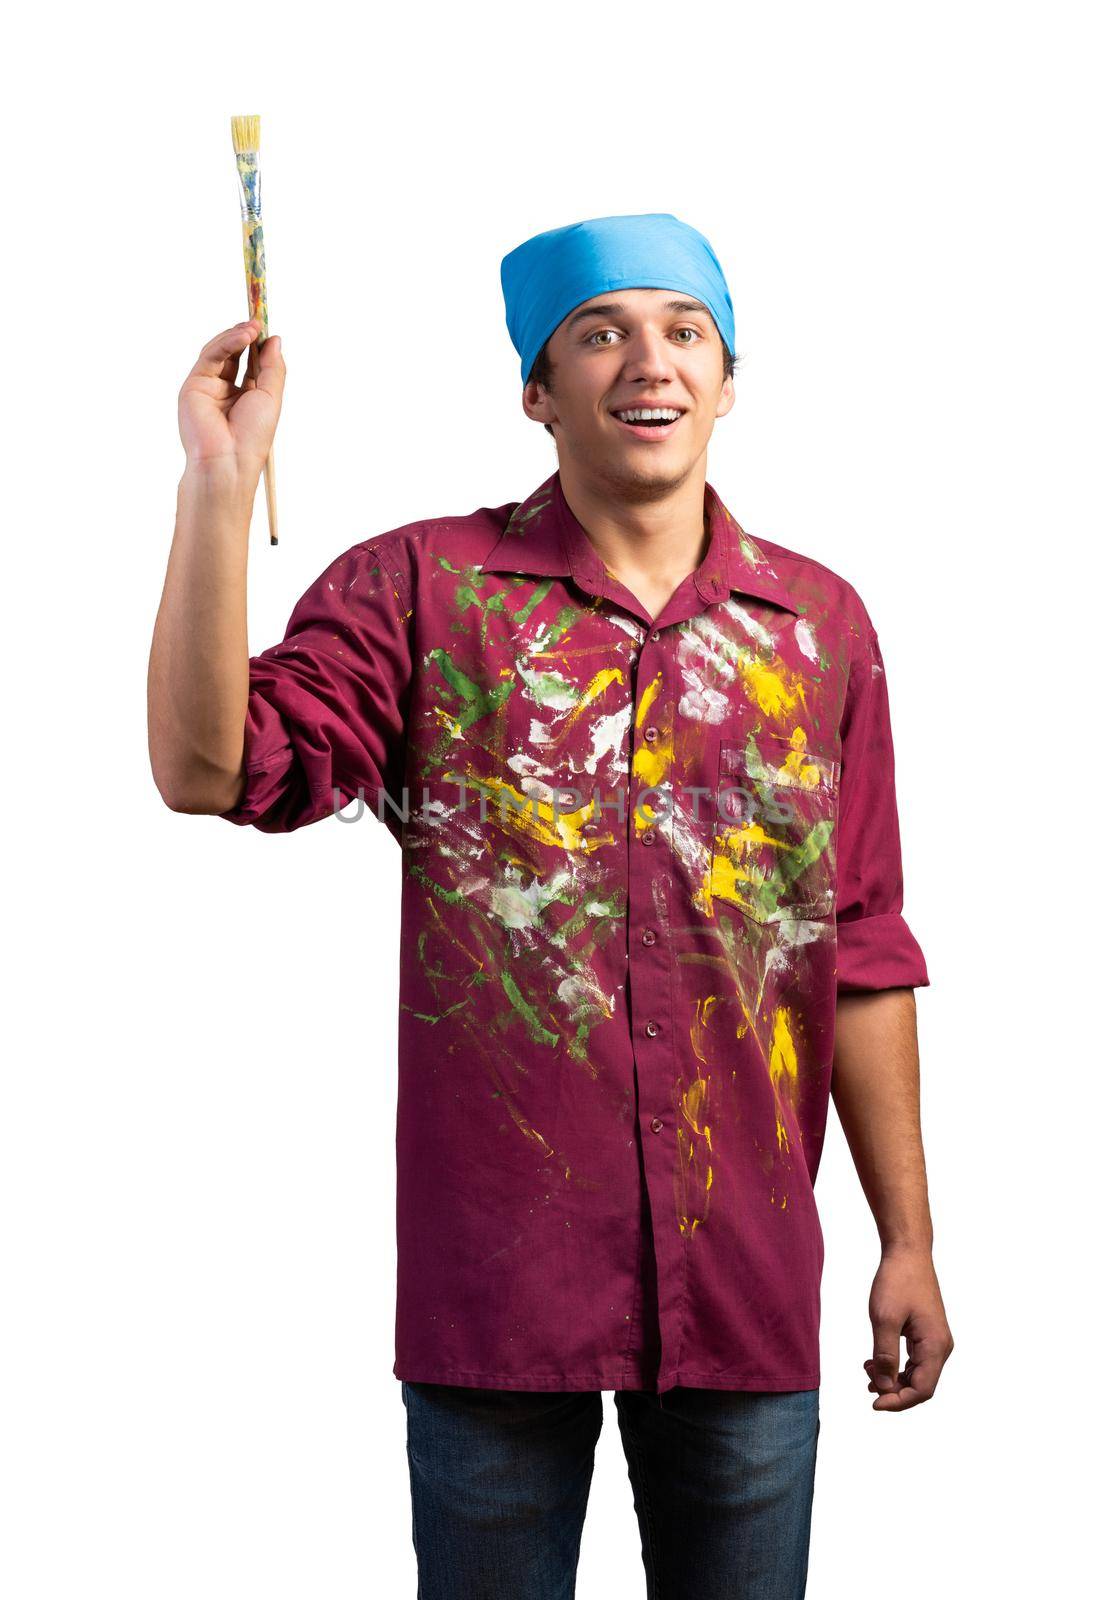 Smiling young painter artist pointing upwards with paintbrush in hand. Portrait of happy painter isolated on white background. Creative hobby and artistic occupation. Art school student posing.